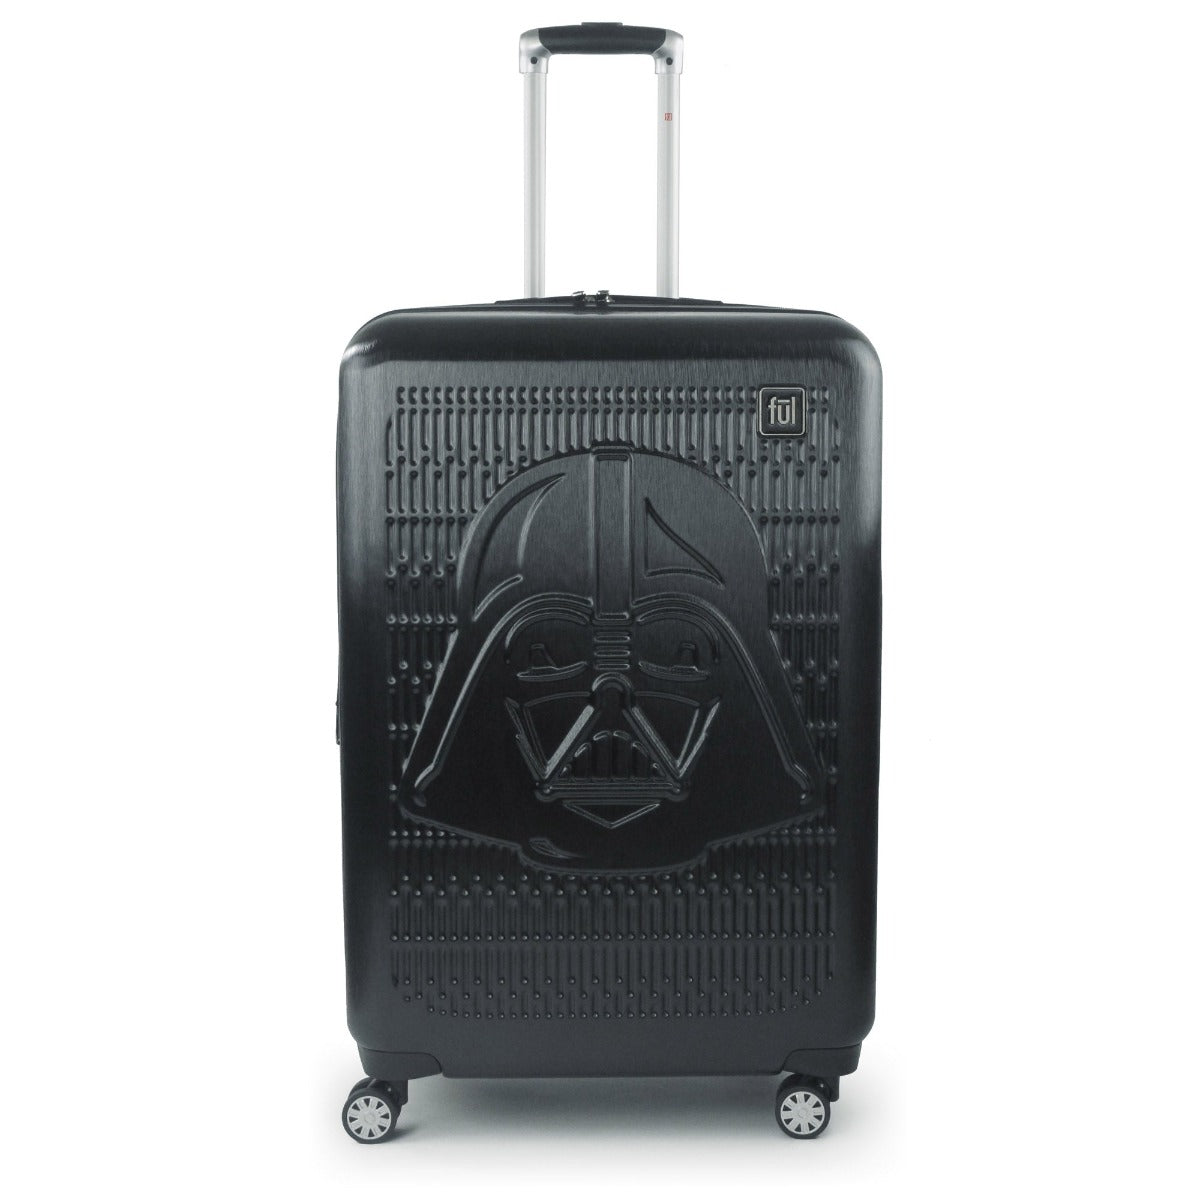 Ful Star Wars The Child 21 Carry-On Luggage